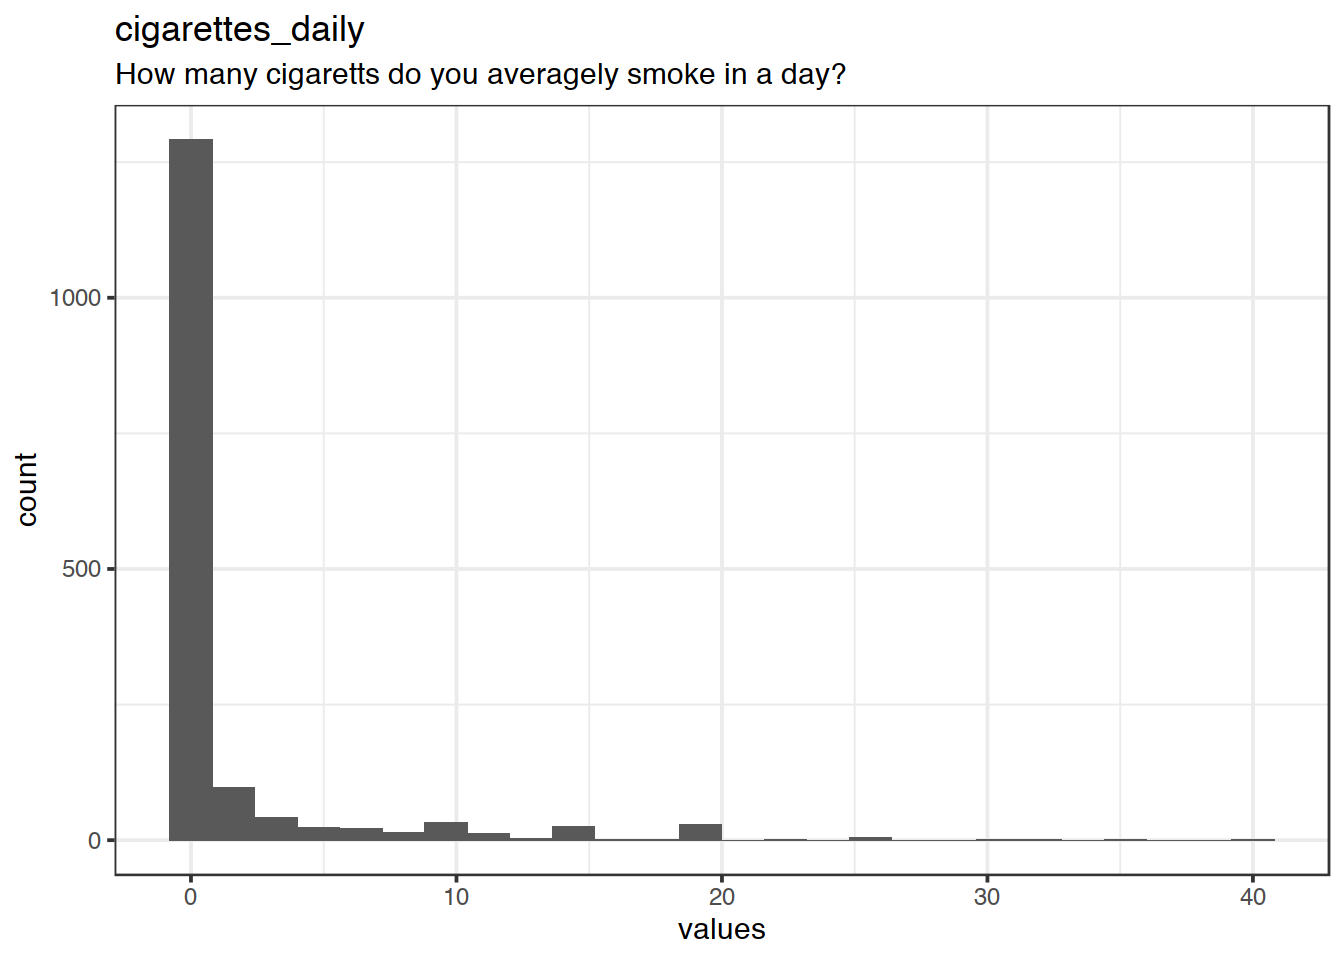 Distribution of values for cigarettes_daily